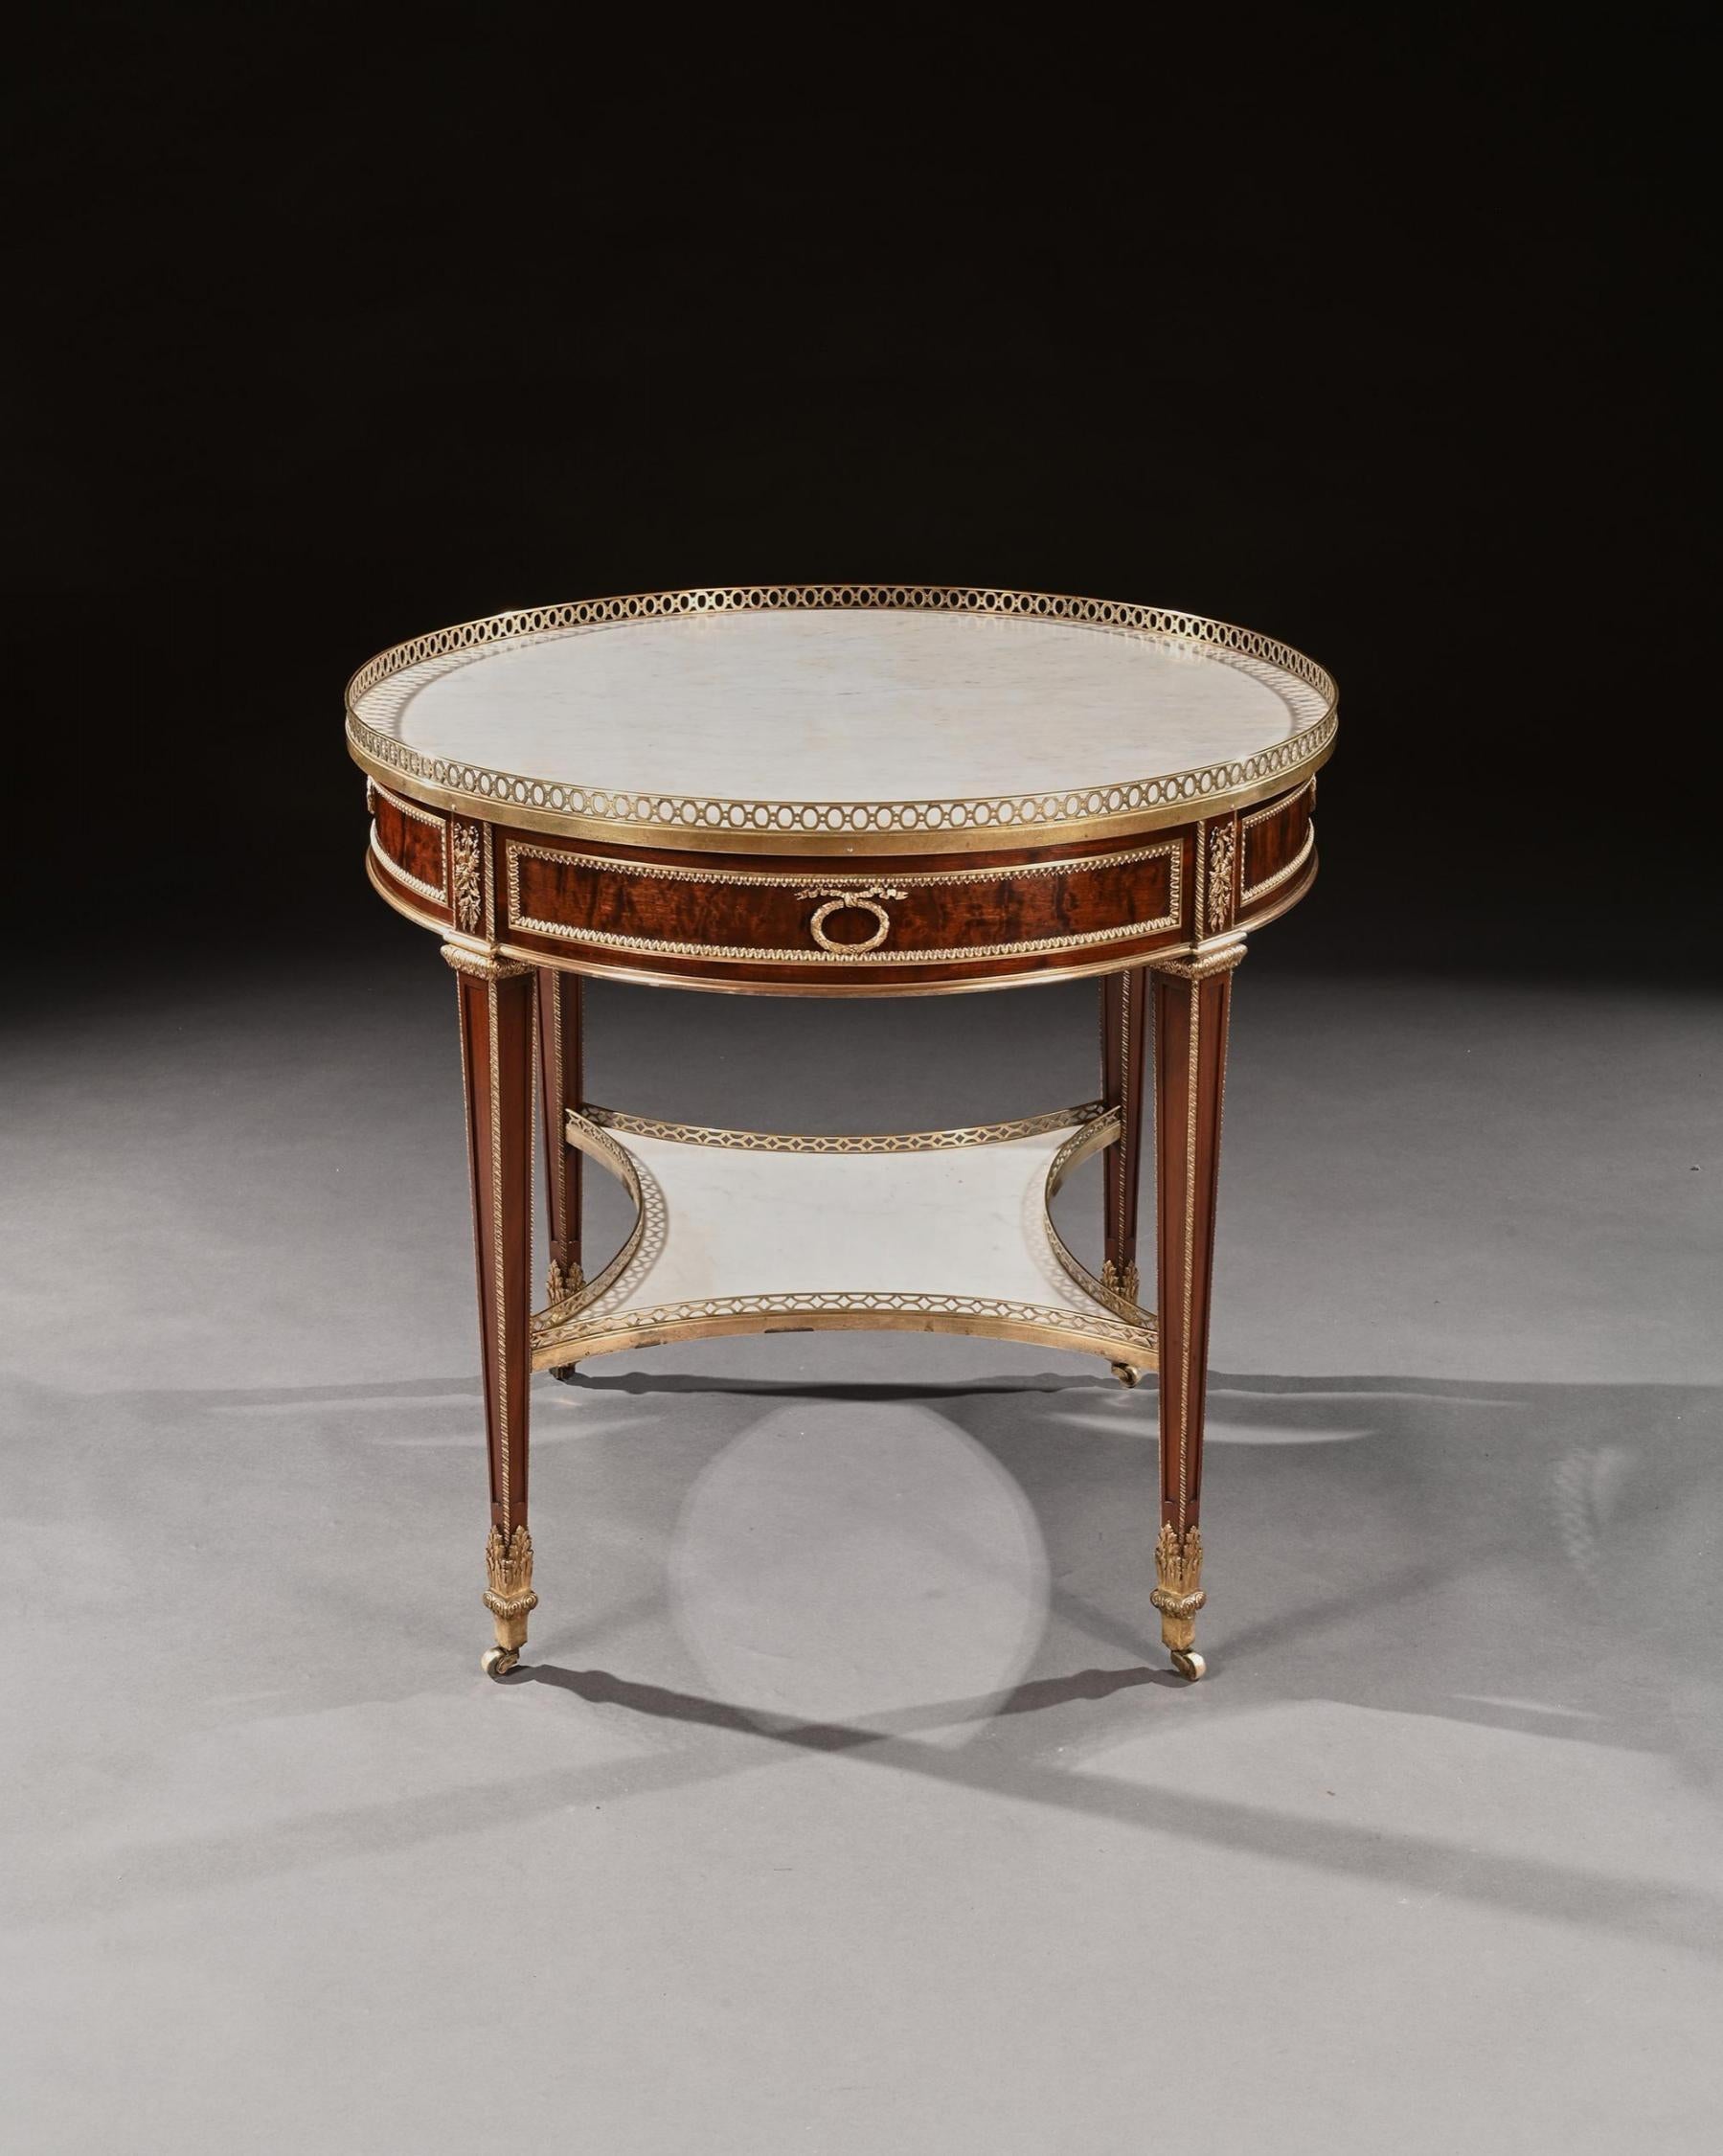 Exceptional G. Durand 19th C. Mahogany & Gilt Bronze Gueridon Bouillotte Table 8